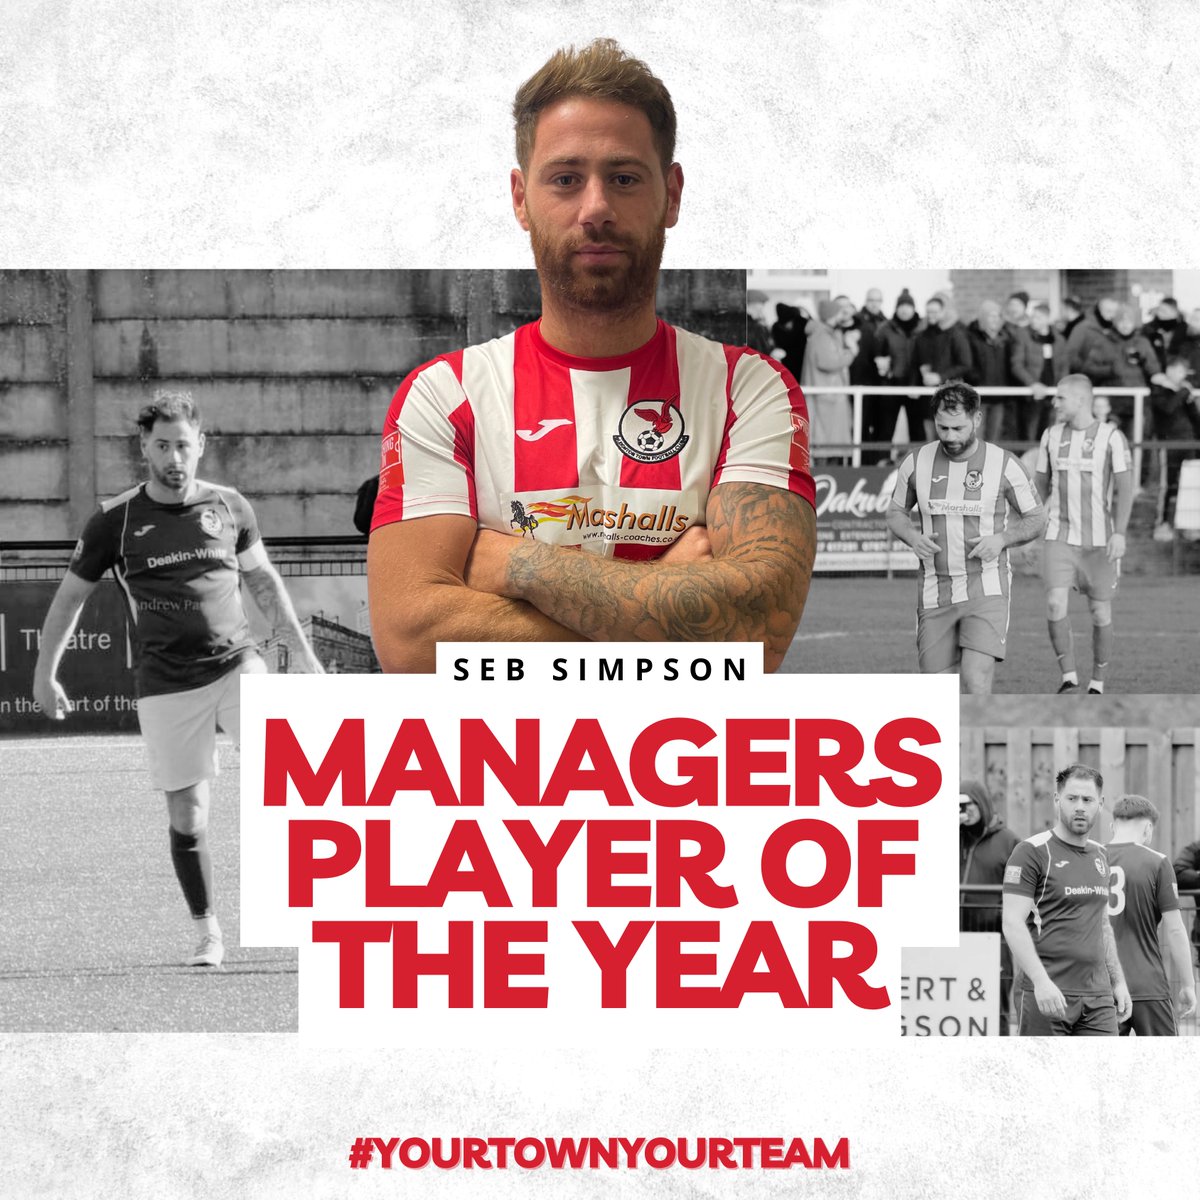 𝙈𝘼𝙉𝘼𝙂𝙀𝙍𝙎 𝙋𝙇𝘼𝙔𝙀𝙍 𝙊𝙁 𝙏𝙃𝙀 𝙔𝙀𝘼𝙍 🏆 Last night @seb_simpson won Managers Player of the Year 👏 Seb has been ever present on our squad this season with excellent performances and always consistent 🫡 Can’t forget that rocket at Boldmere 🚀 #YourTownYourTeam